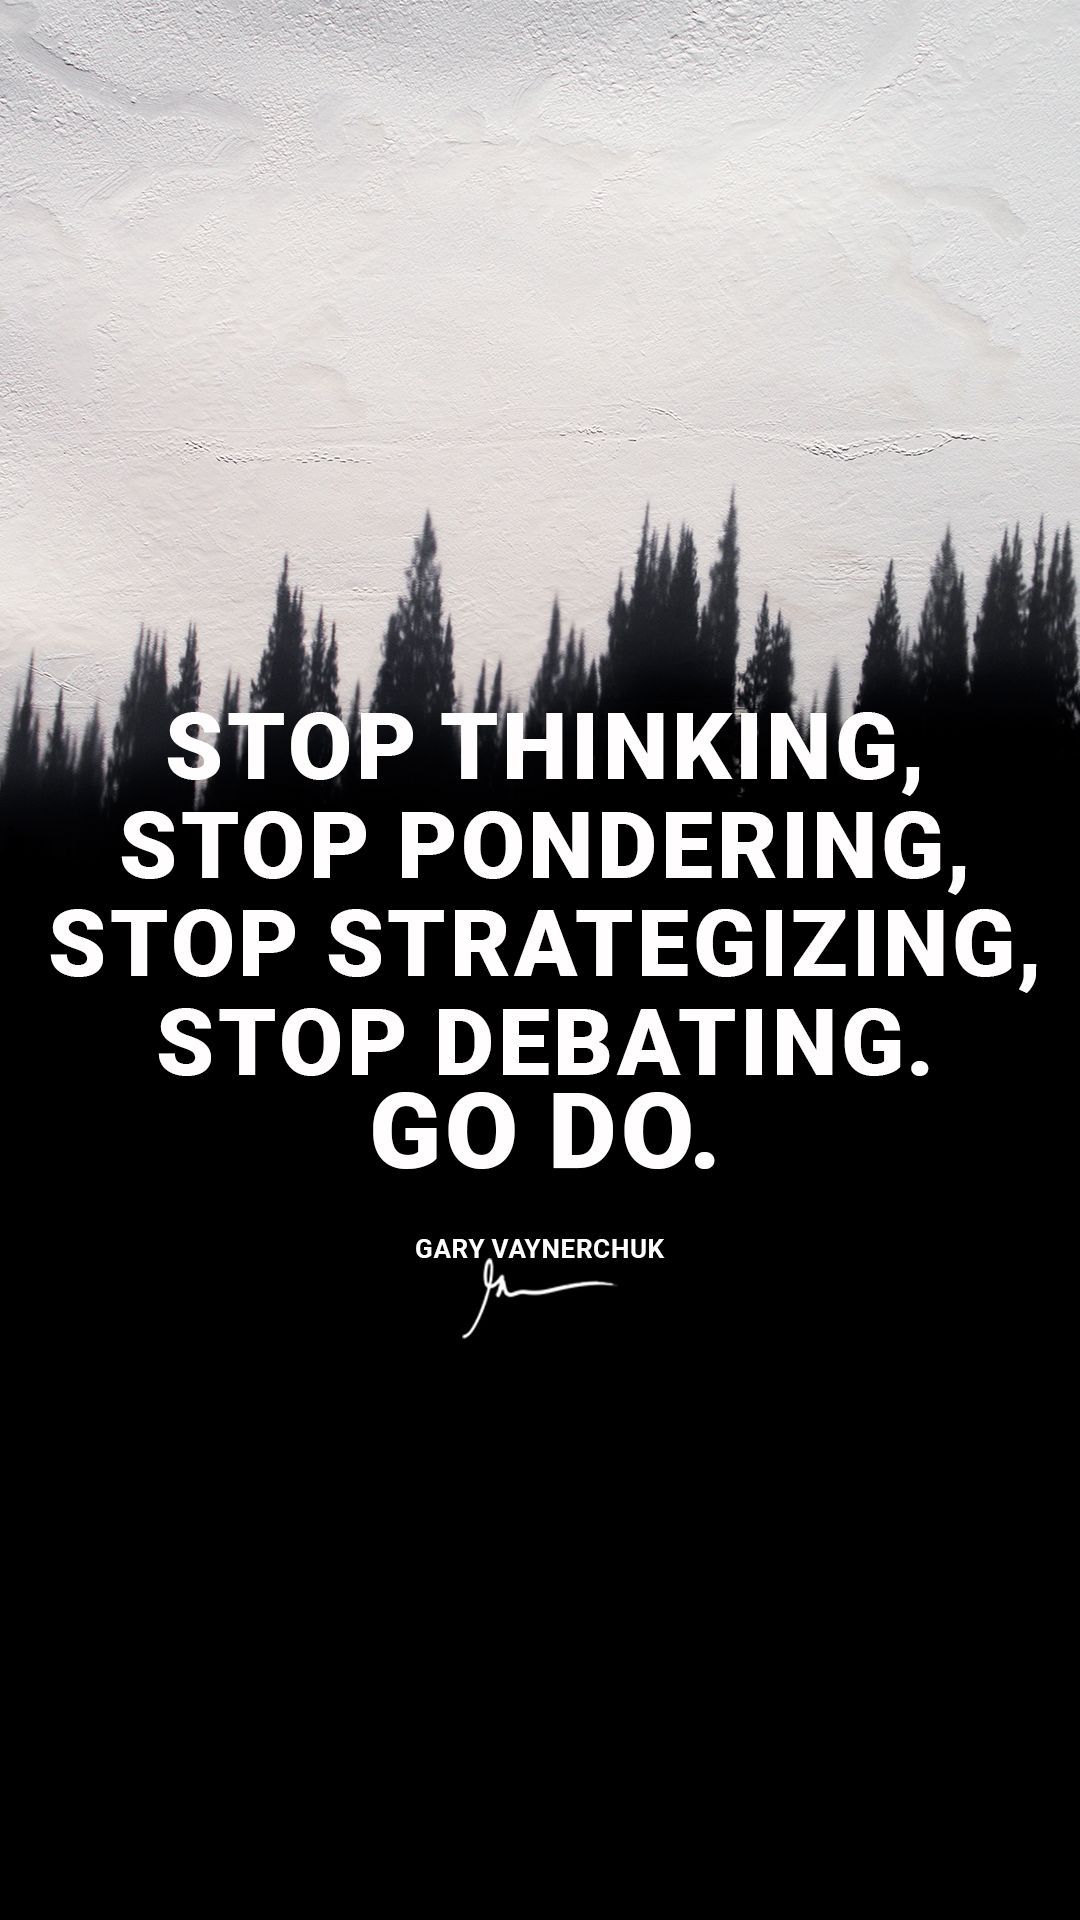 Stop Thinking, Stop Pondering, Stop strategizing, Stop debating, Go Do. Quotes by Gary. Gary vaynerchuk quotes, Motivational quotes wallpaper, Quotes to live by